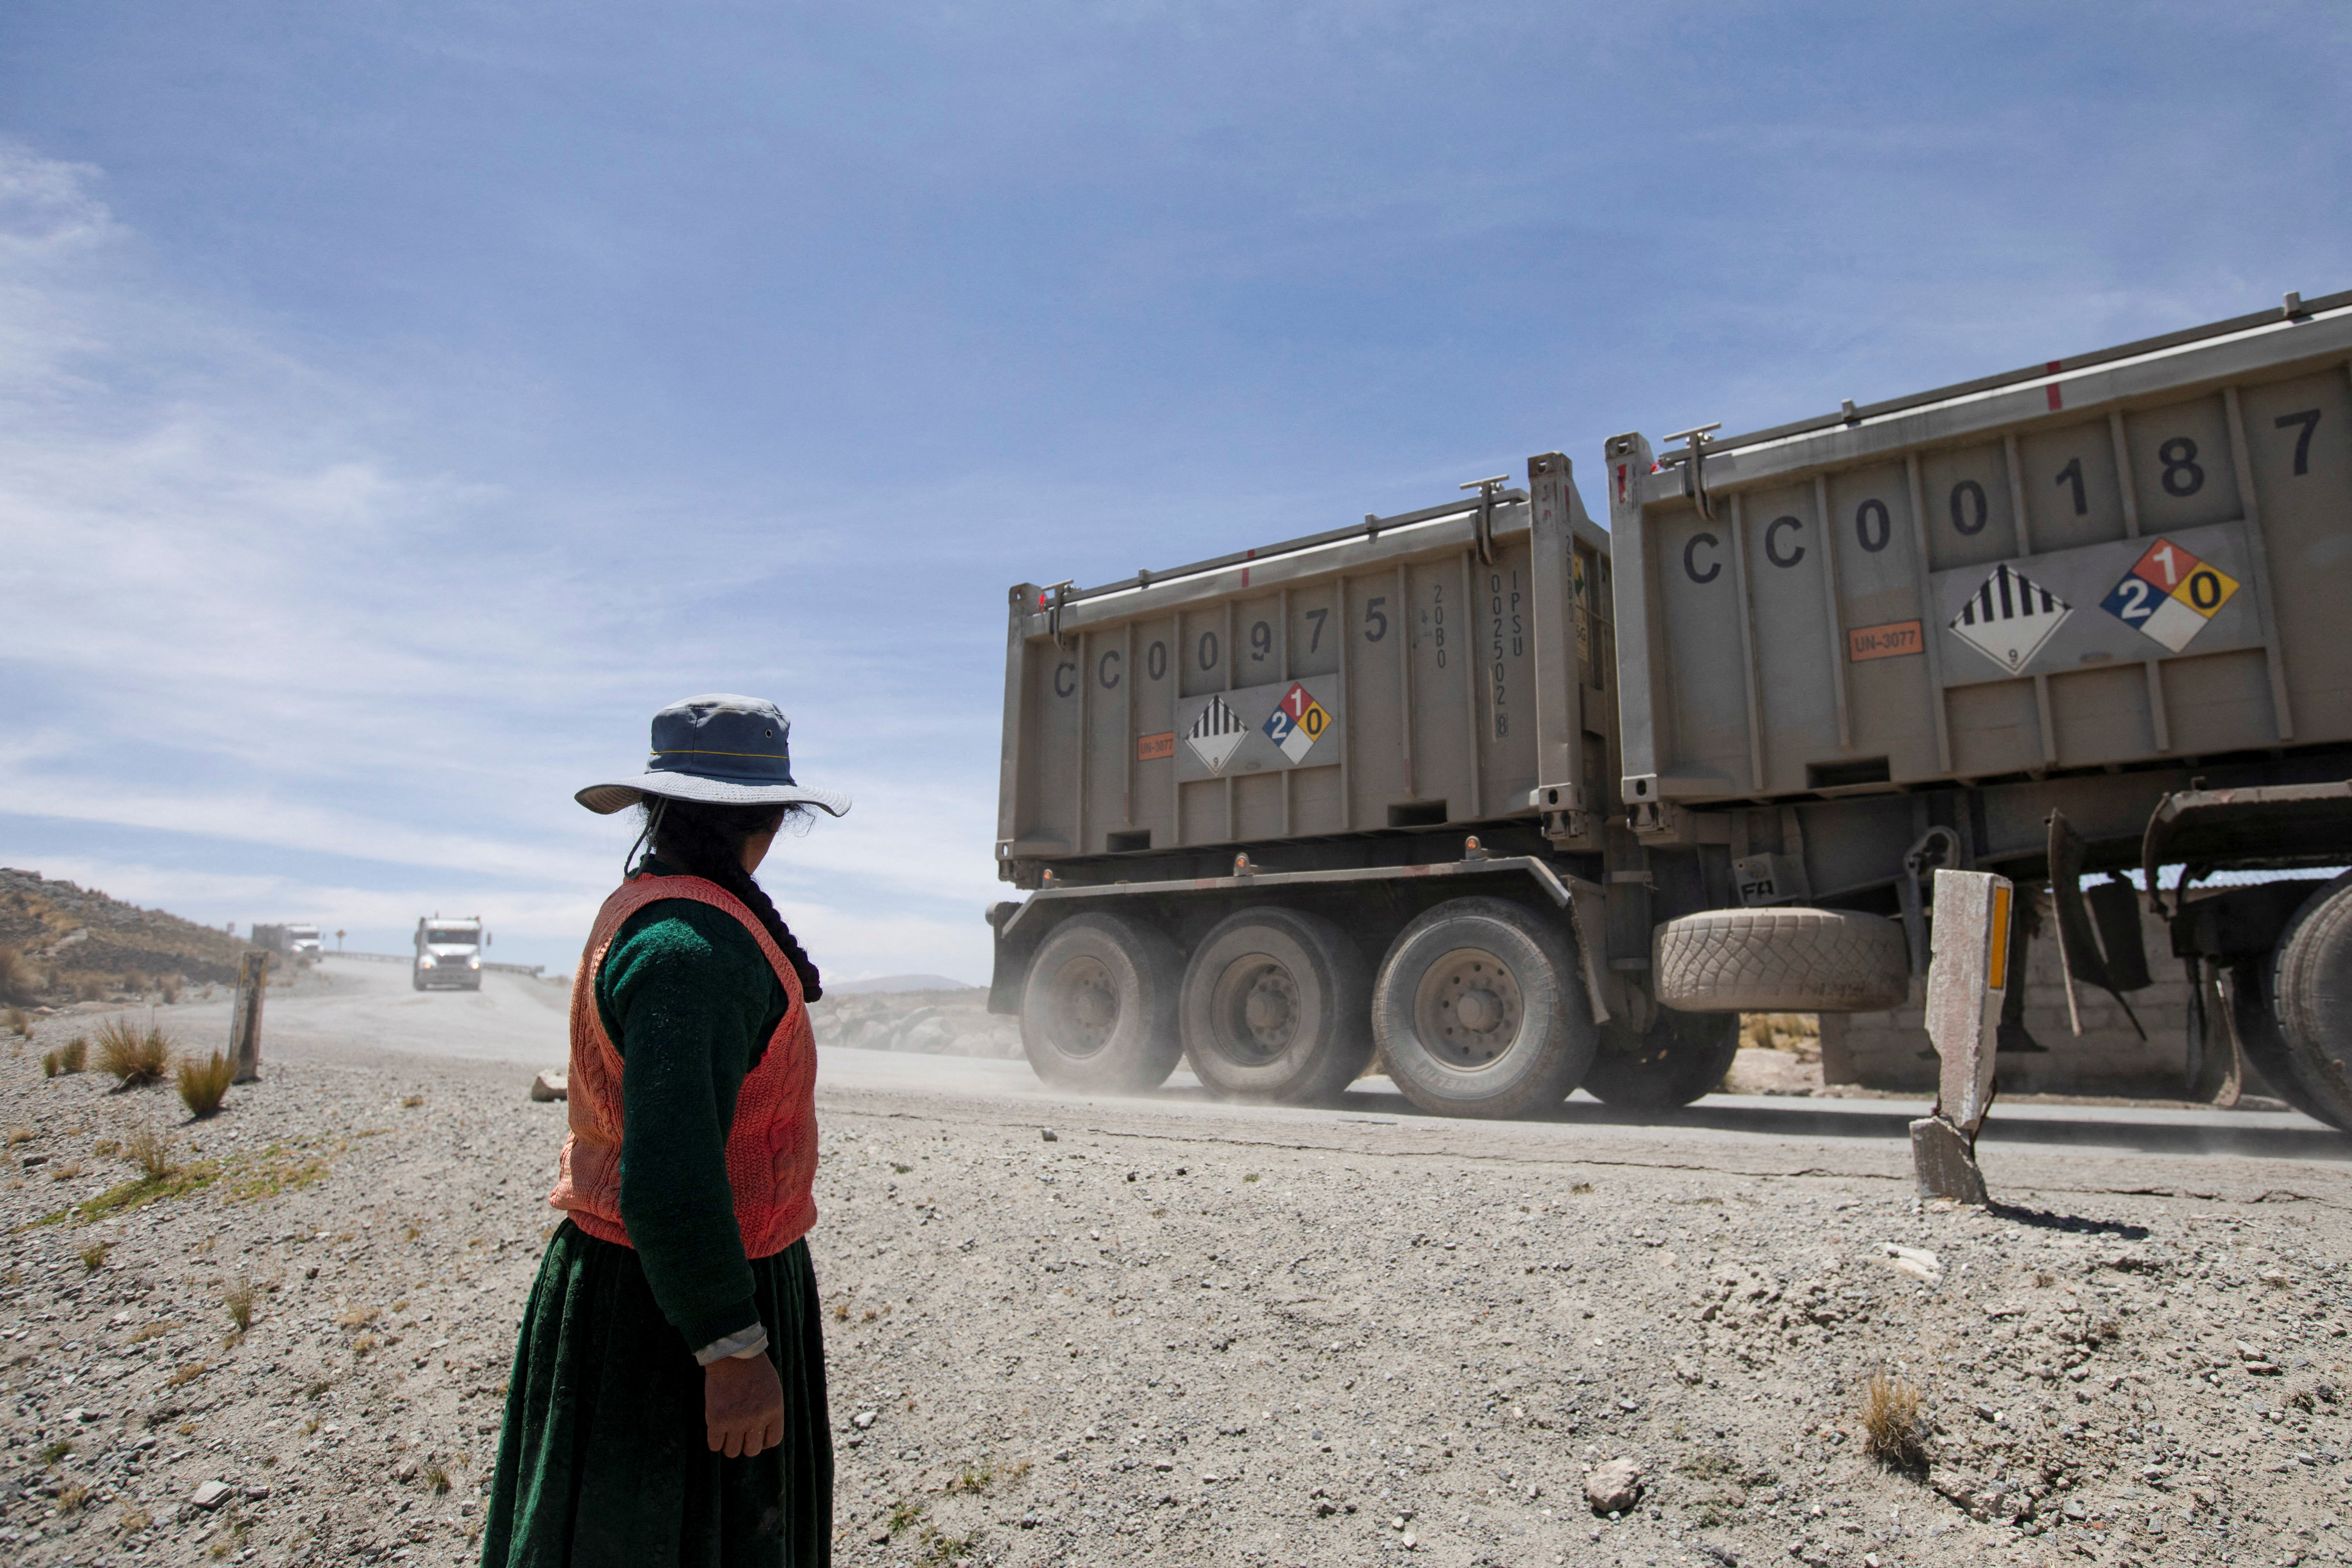 Peru's Andean rural residents complain of negative effects of mining activity